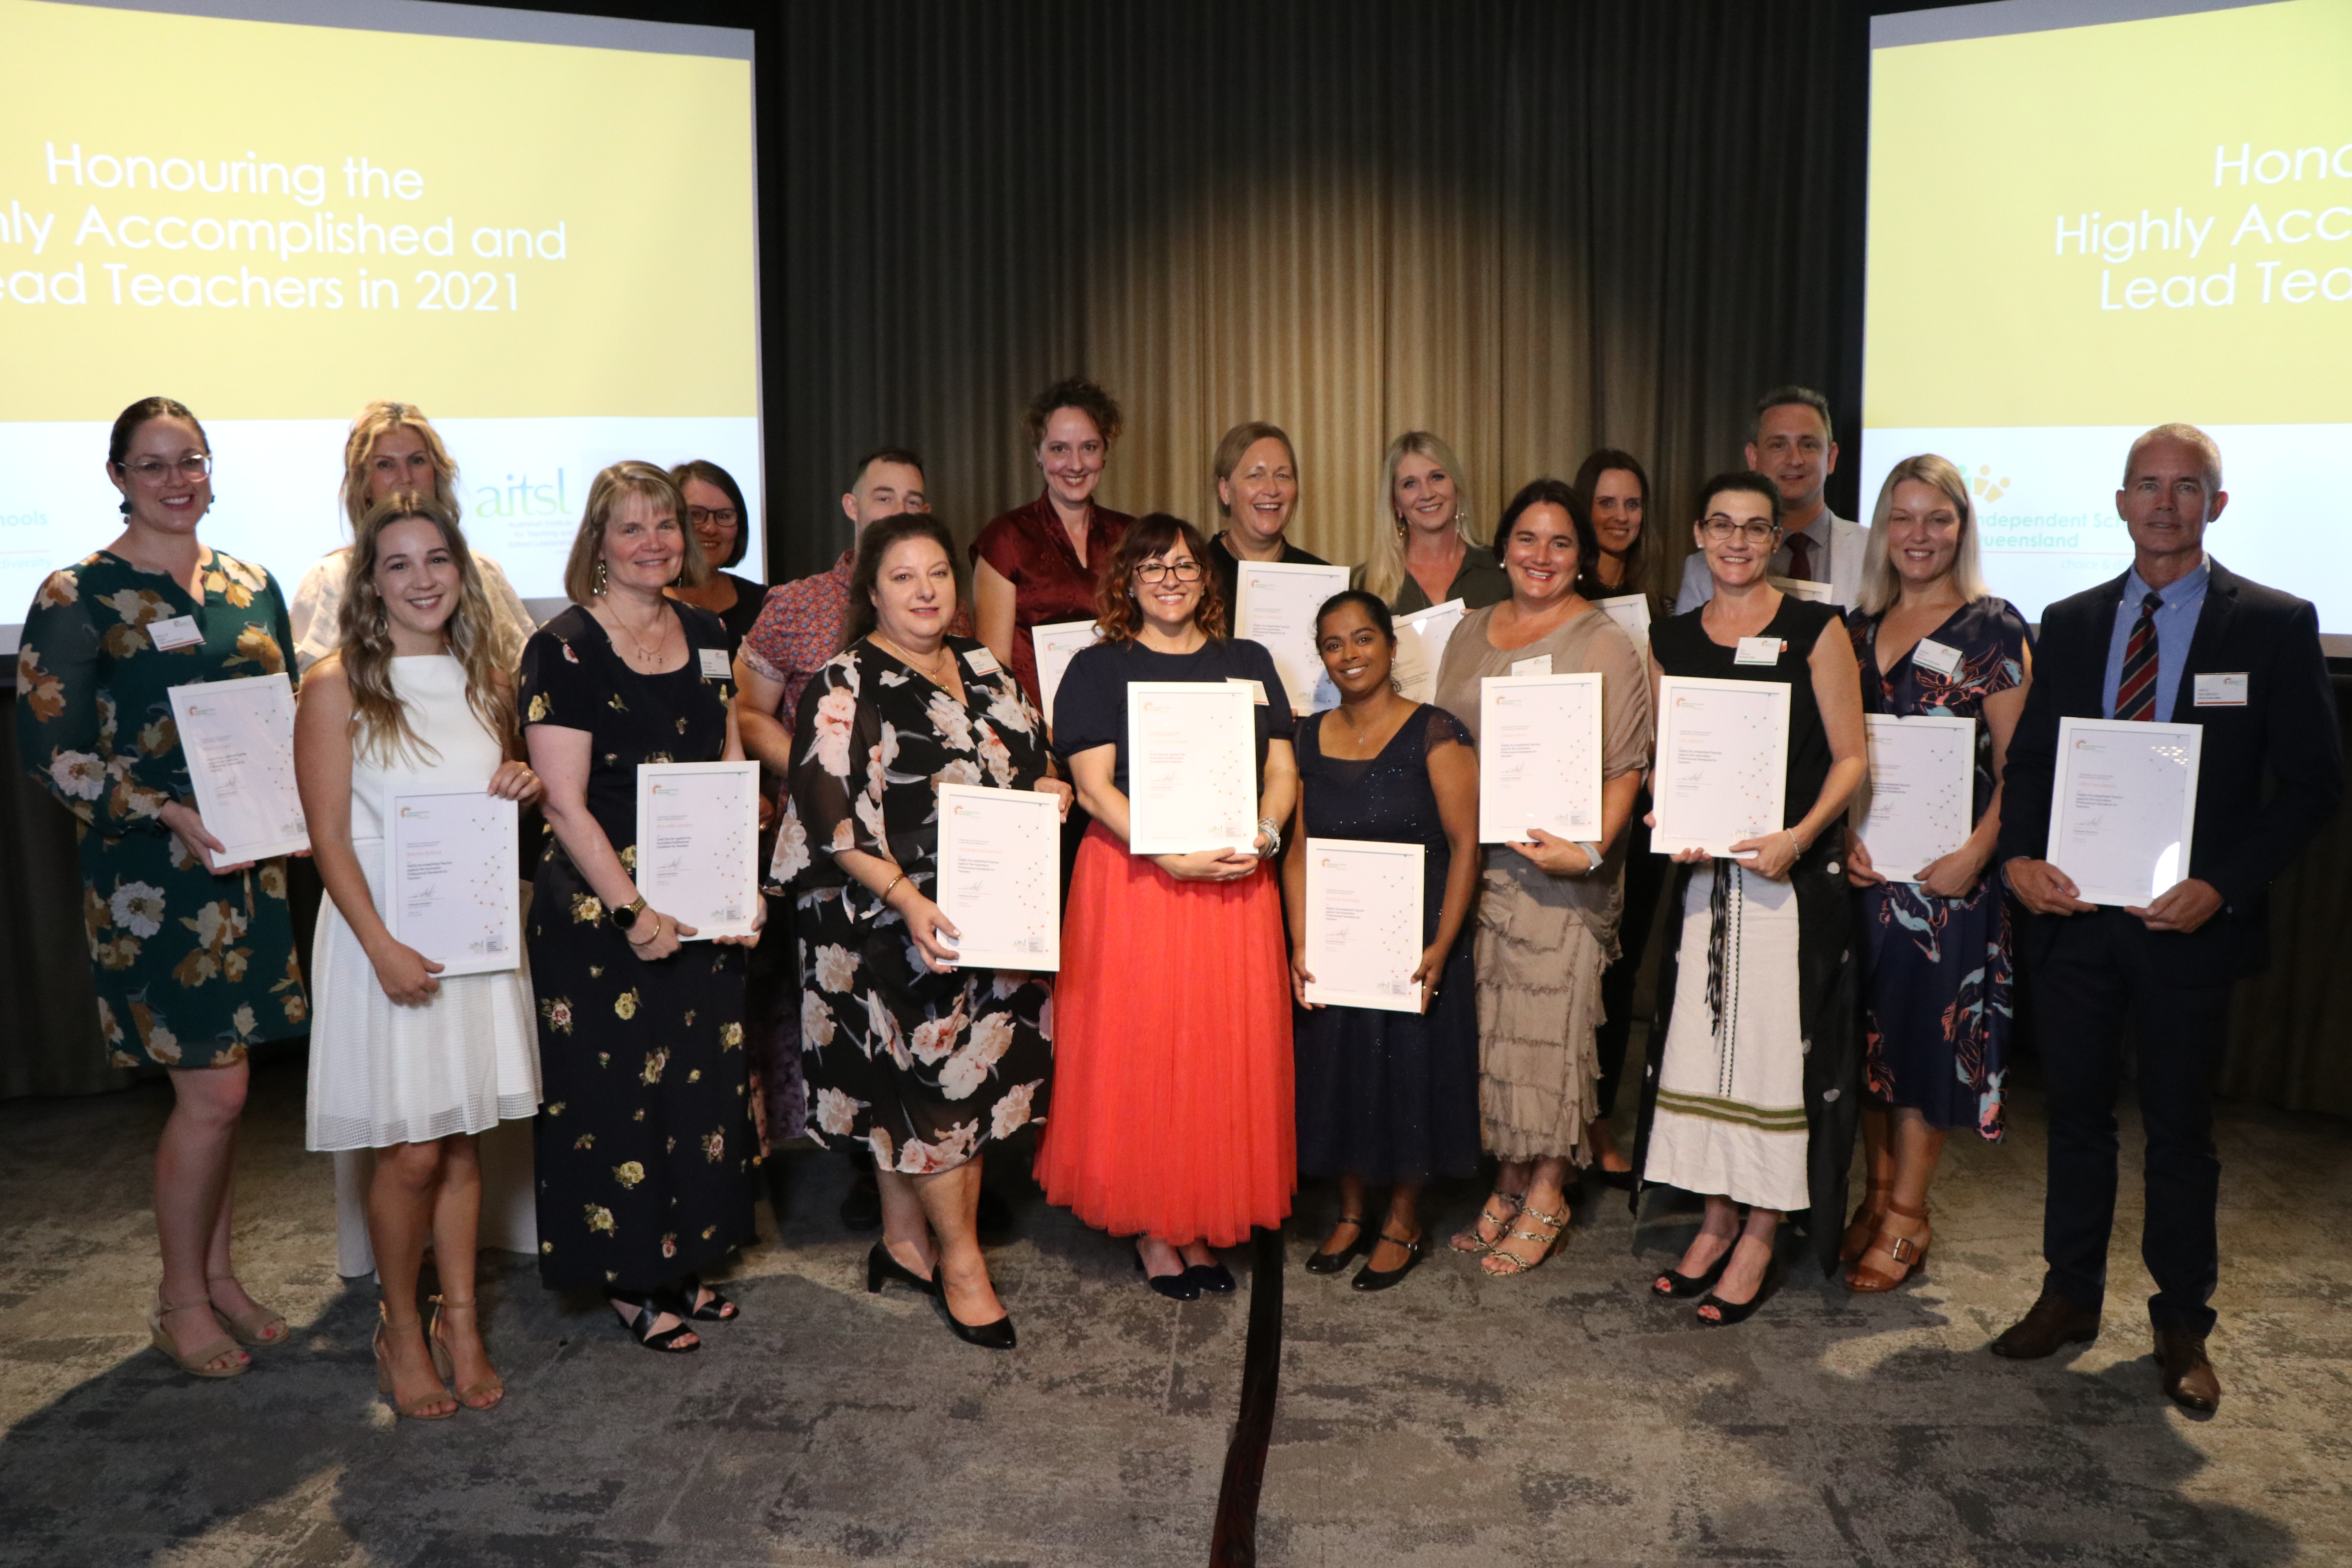 Queensland welcomes 23 more Highly Accomplished and Lead Teachers